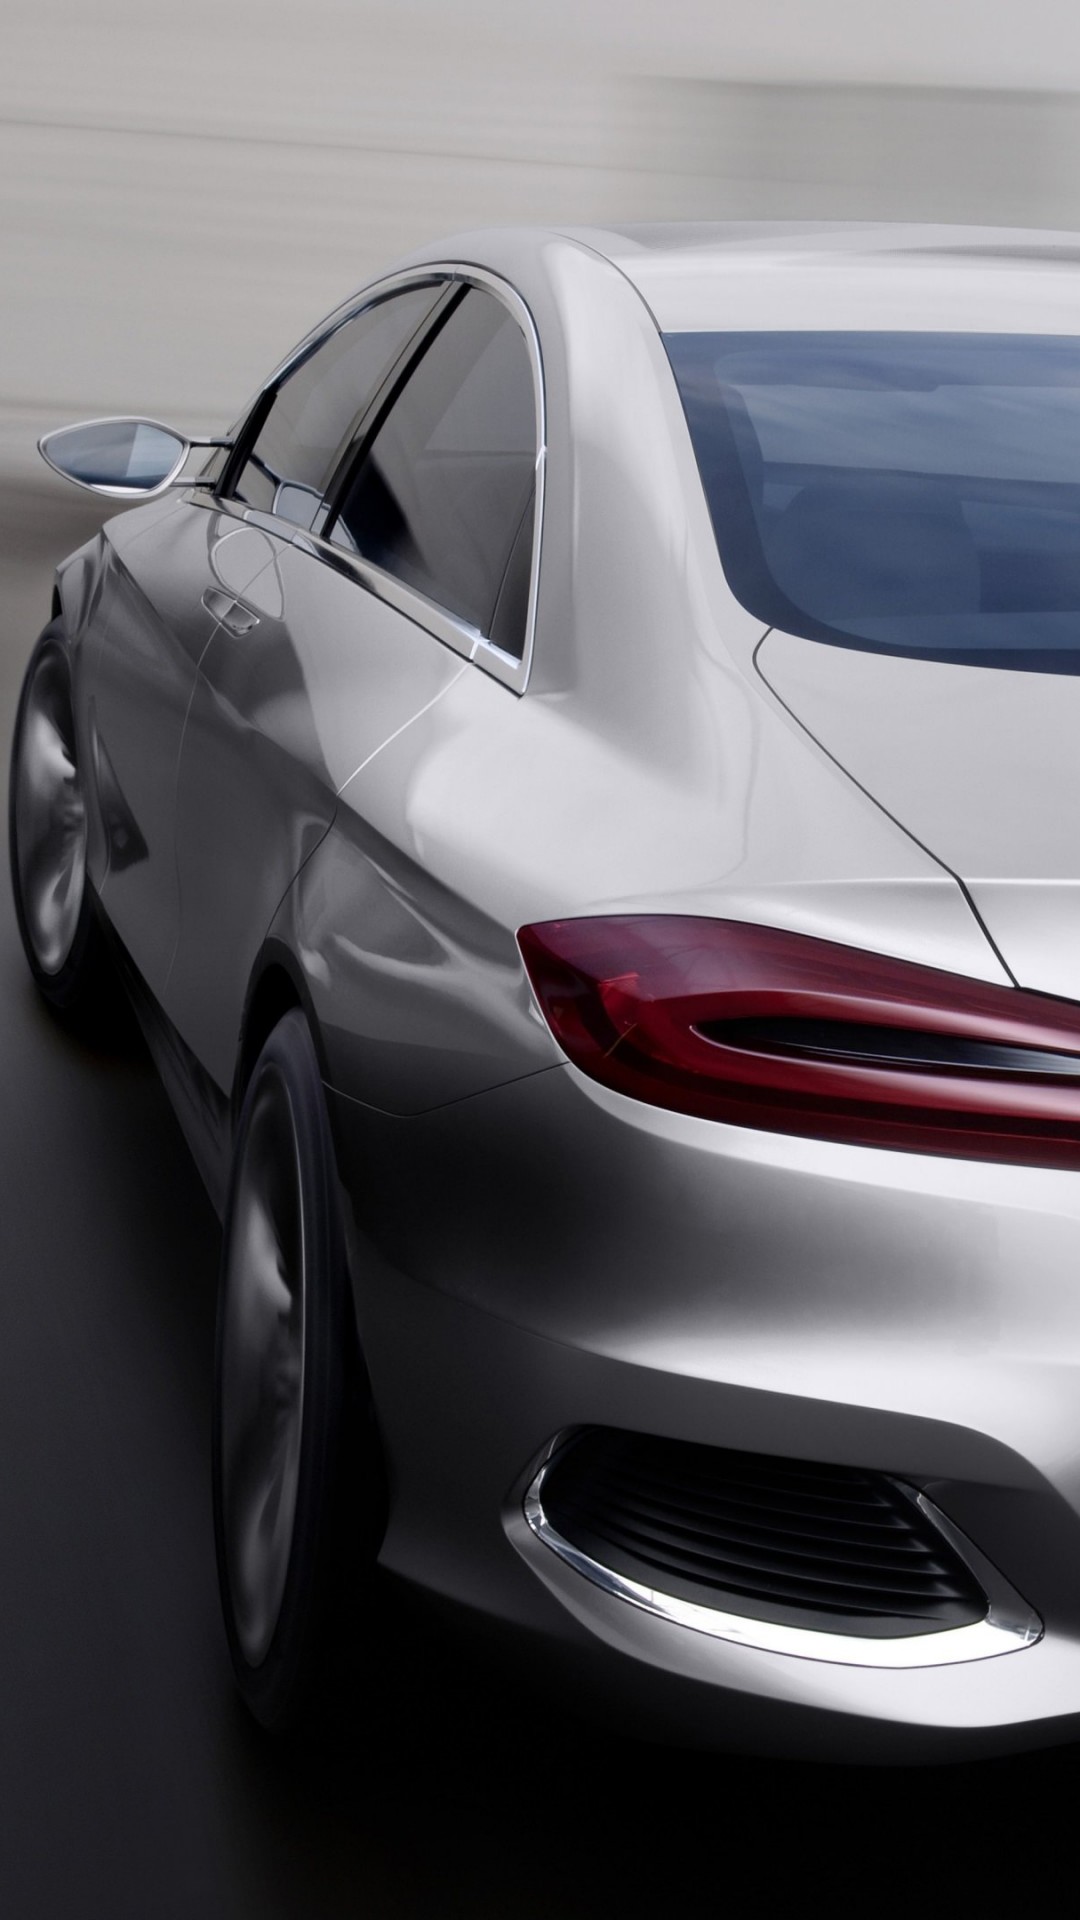 Mercedes Benz F800 Concept Rear View Wallpaper for SONY Xperia Z2